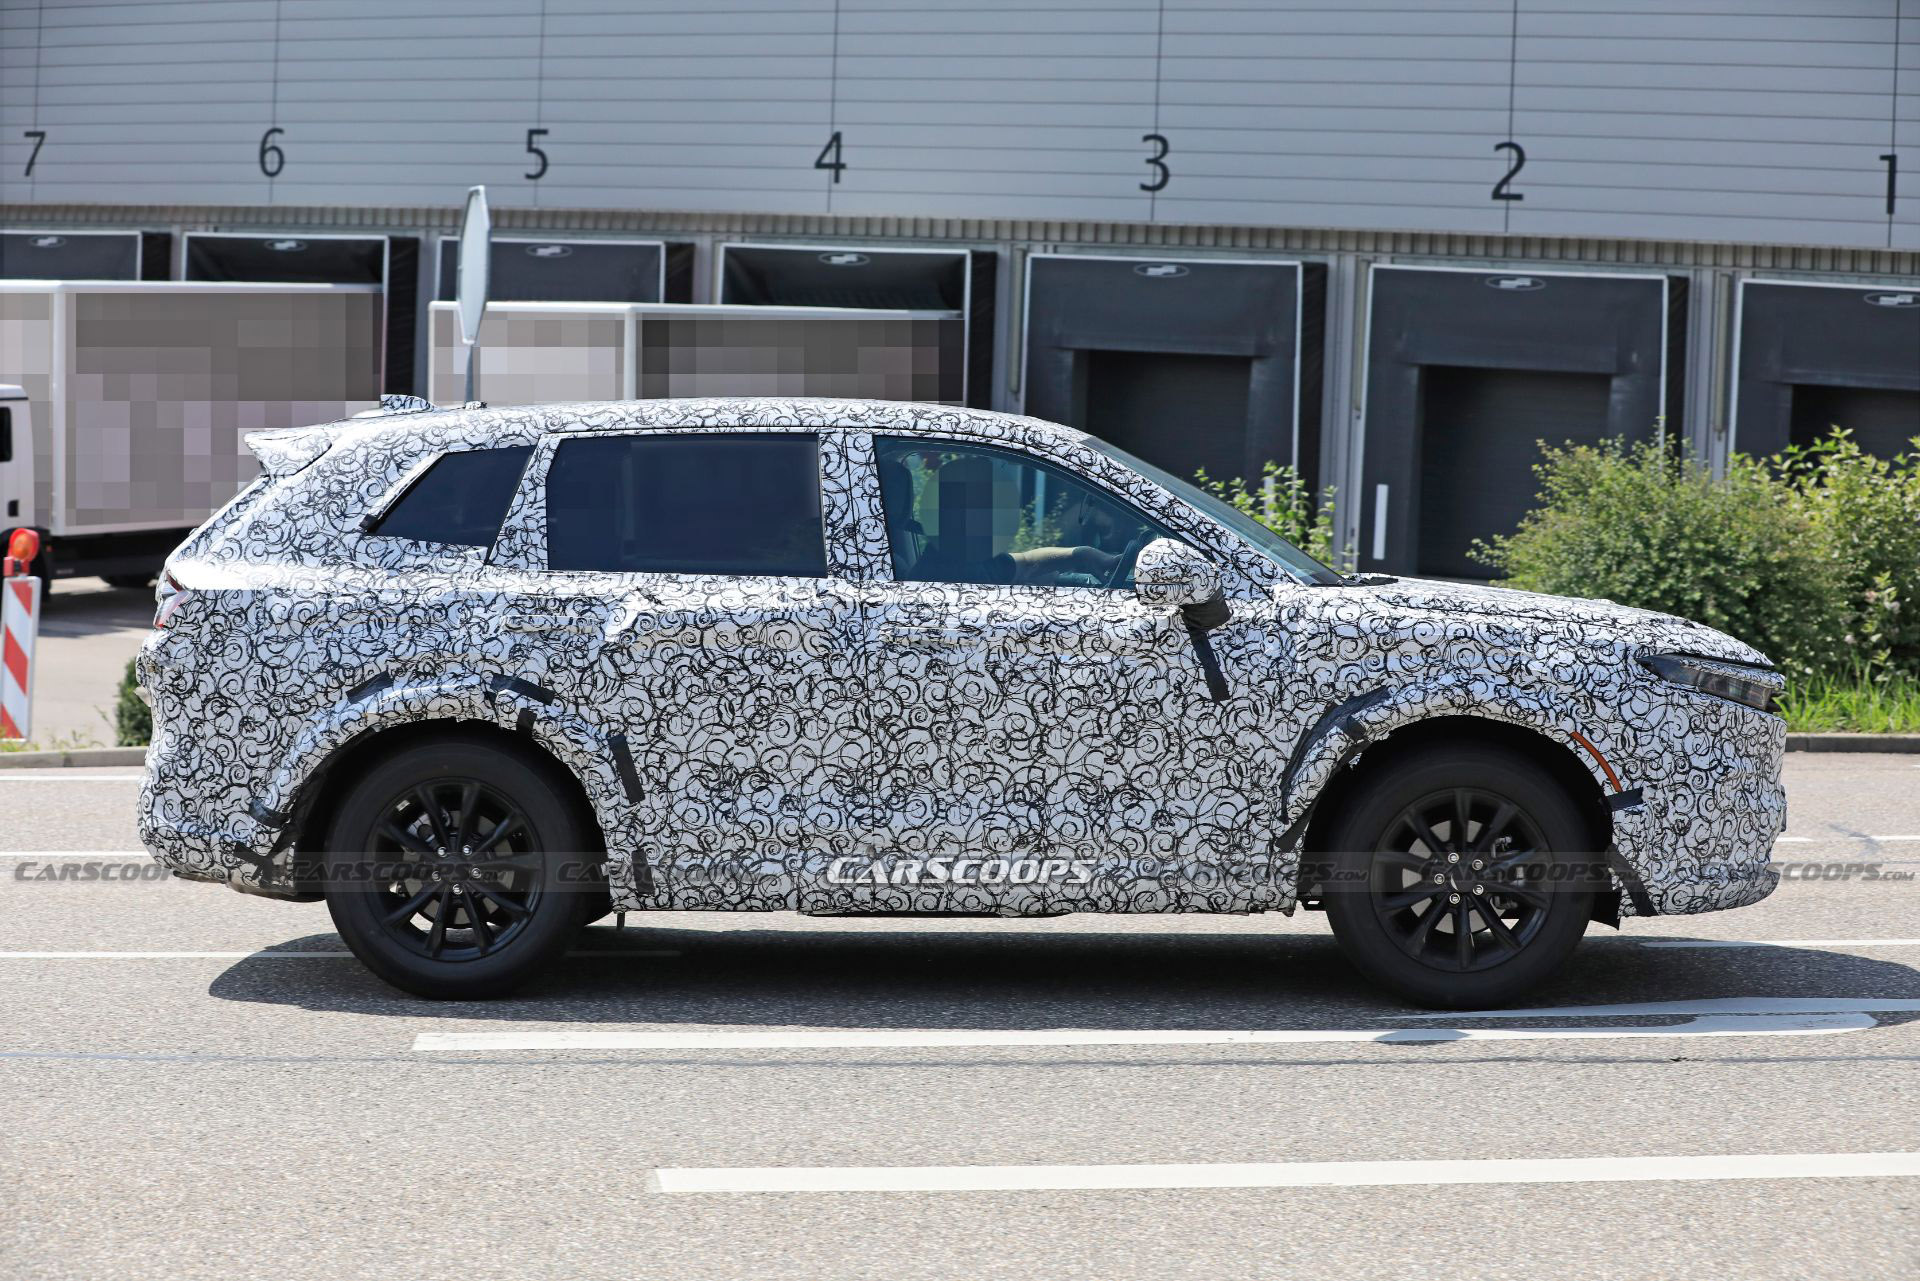 2023 Honda CR-V Spied Showing Larger Body With More Mature Styling